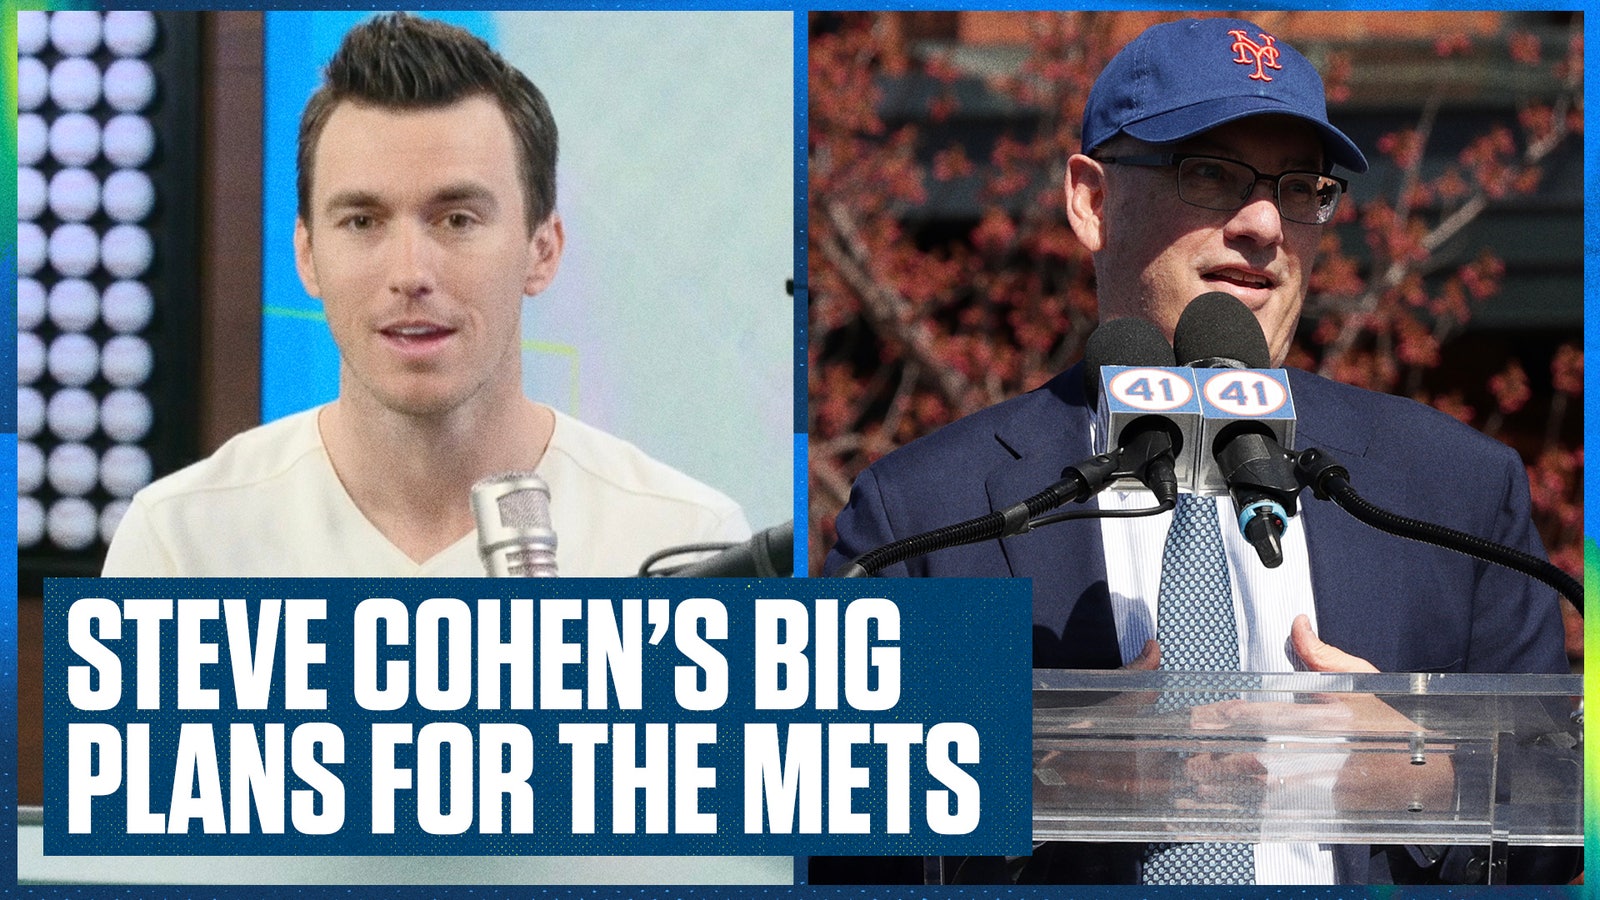 New York Mets owner Steve Cohen has big plans for the team this season